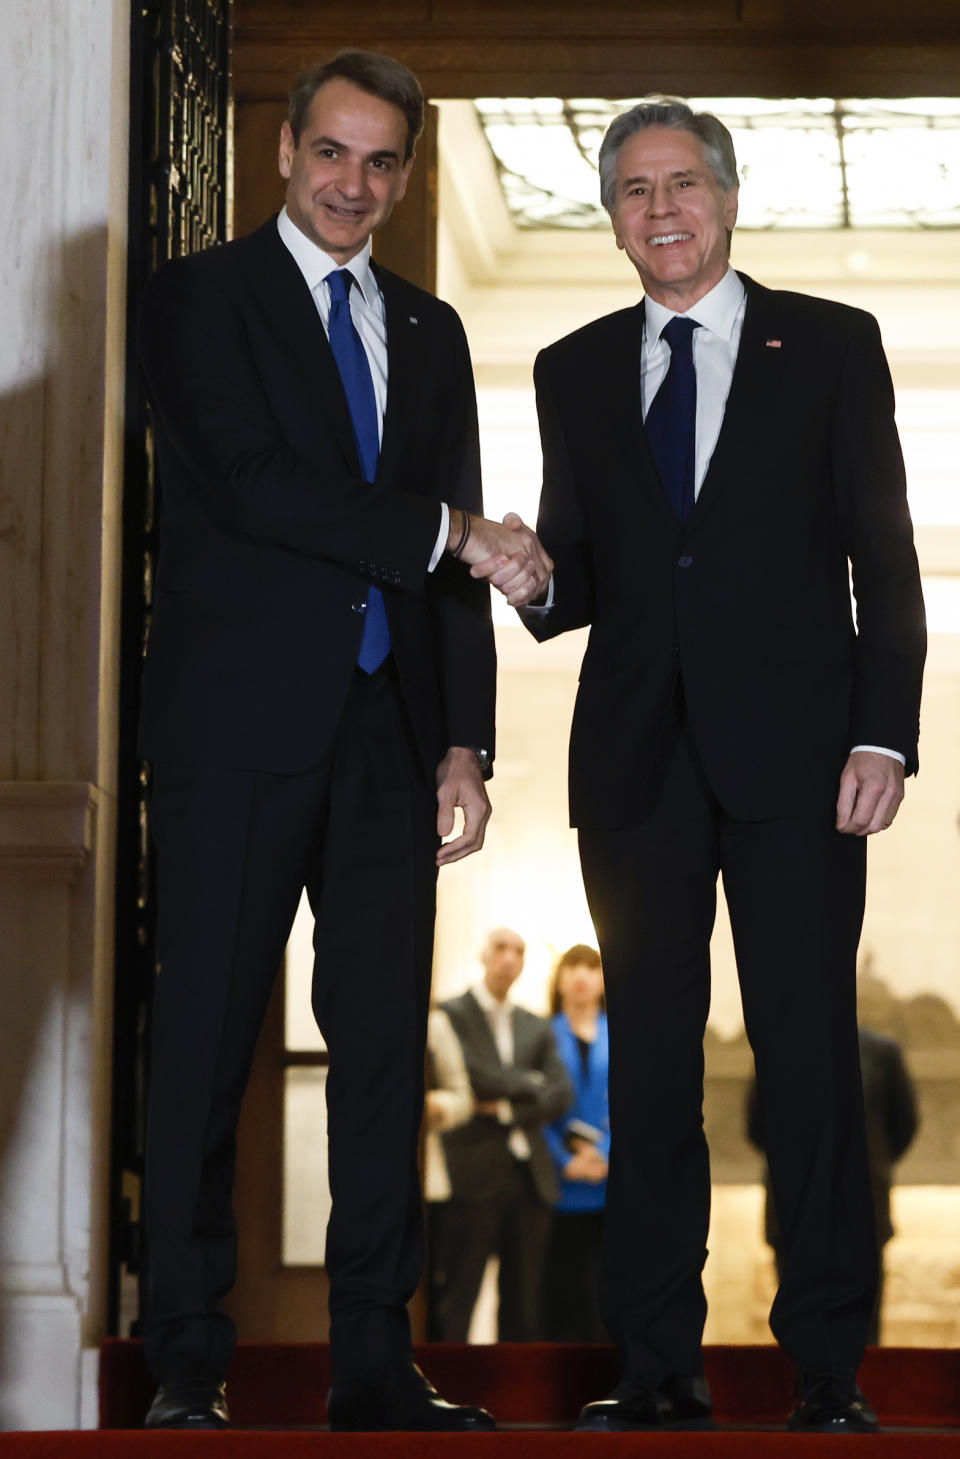 Greece's Prime Minister Kyriakos Mitsotakis, left, welcomes the US Secretary of State Antony Blinken before their meeting at Maximos Mansion in Athens, Greece, on Monday, Feb. 20, 2023. Blinken will be on a two-day trip in Athens, after his visit to Turkey, to meet with the country's leadership and launch the fourth round of the US-Greece Strategic Dialogue. (Louiza Vradi/Pool Photo via AP)